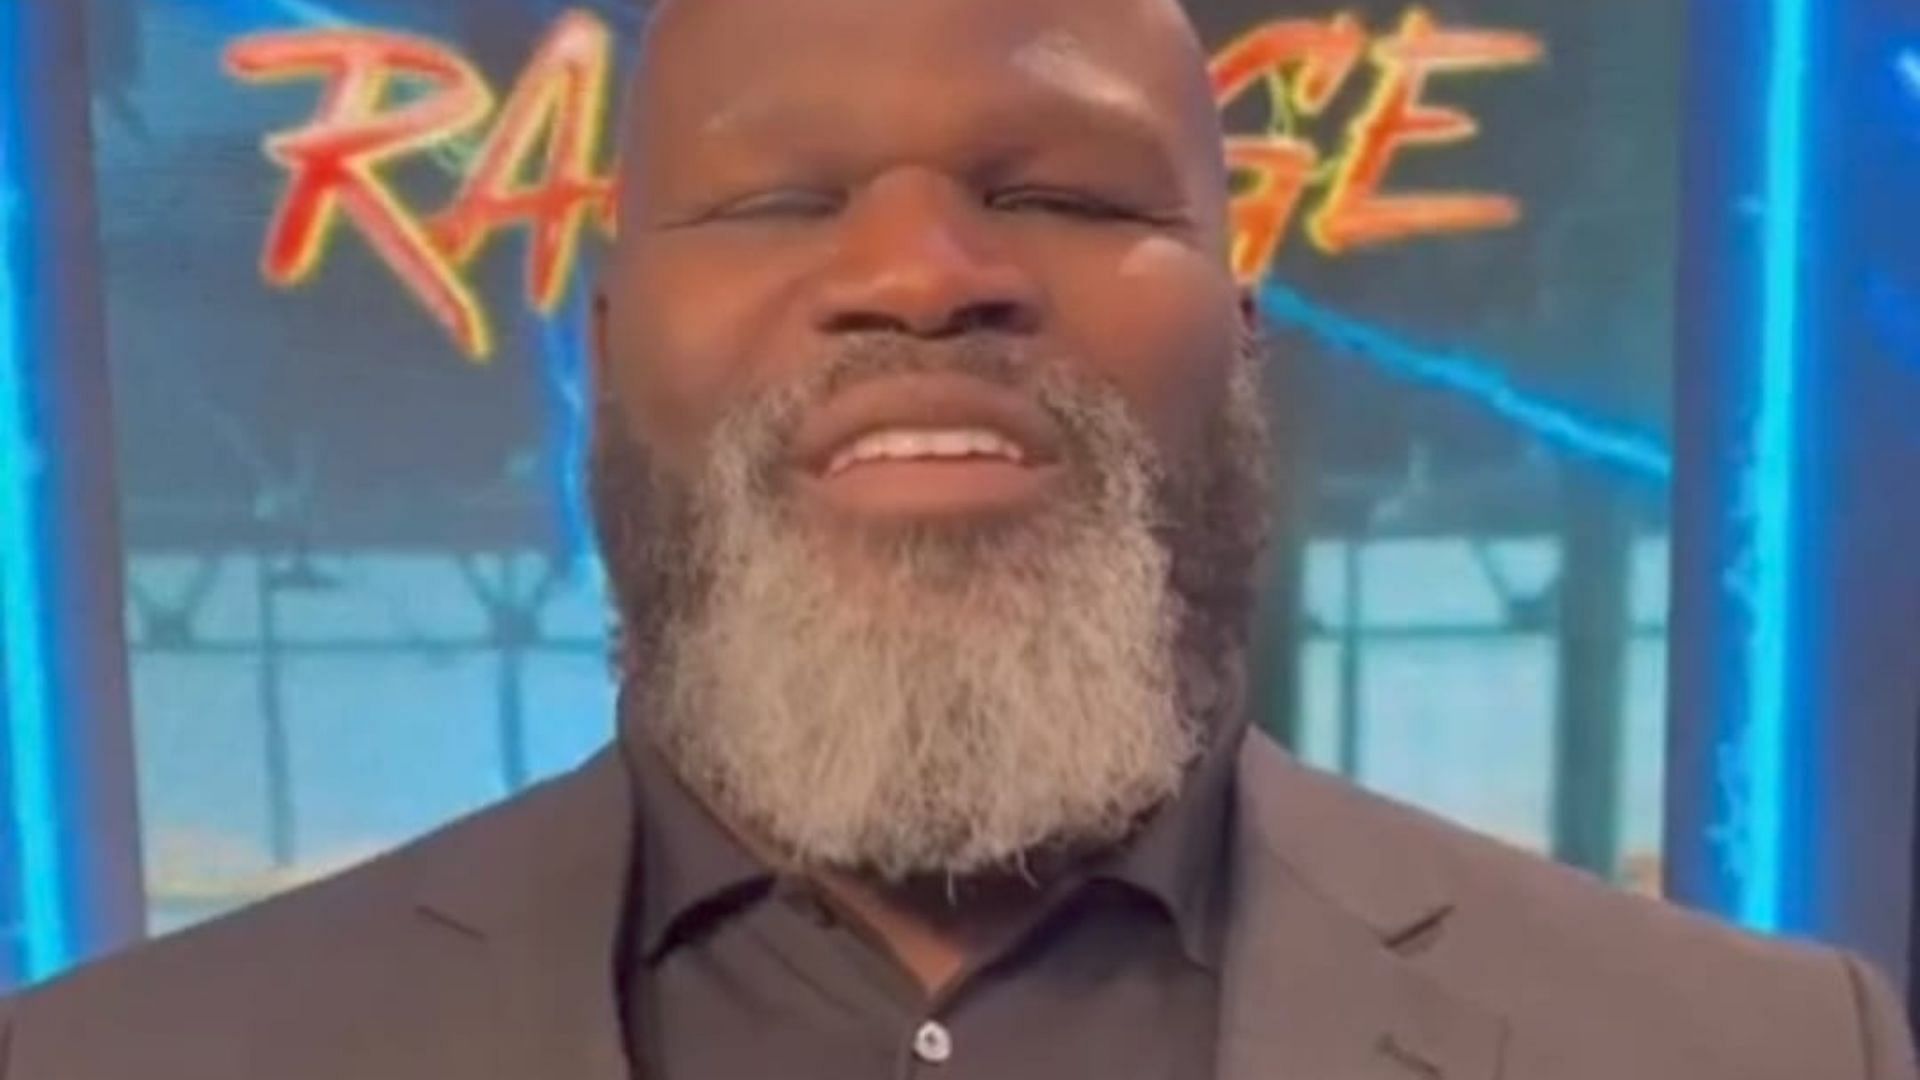 Mark Henry is one of AEW